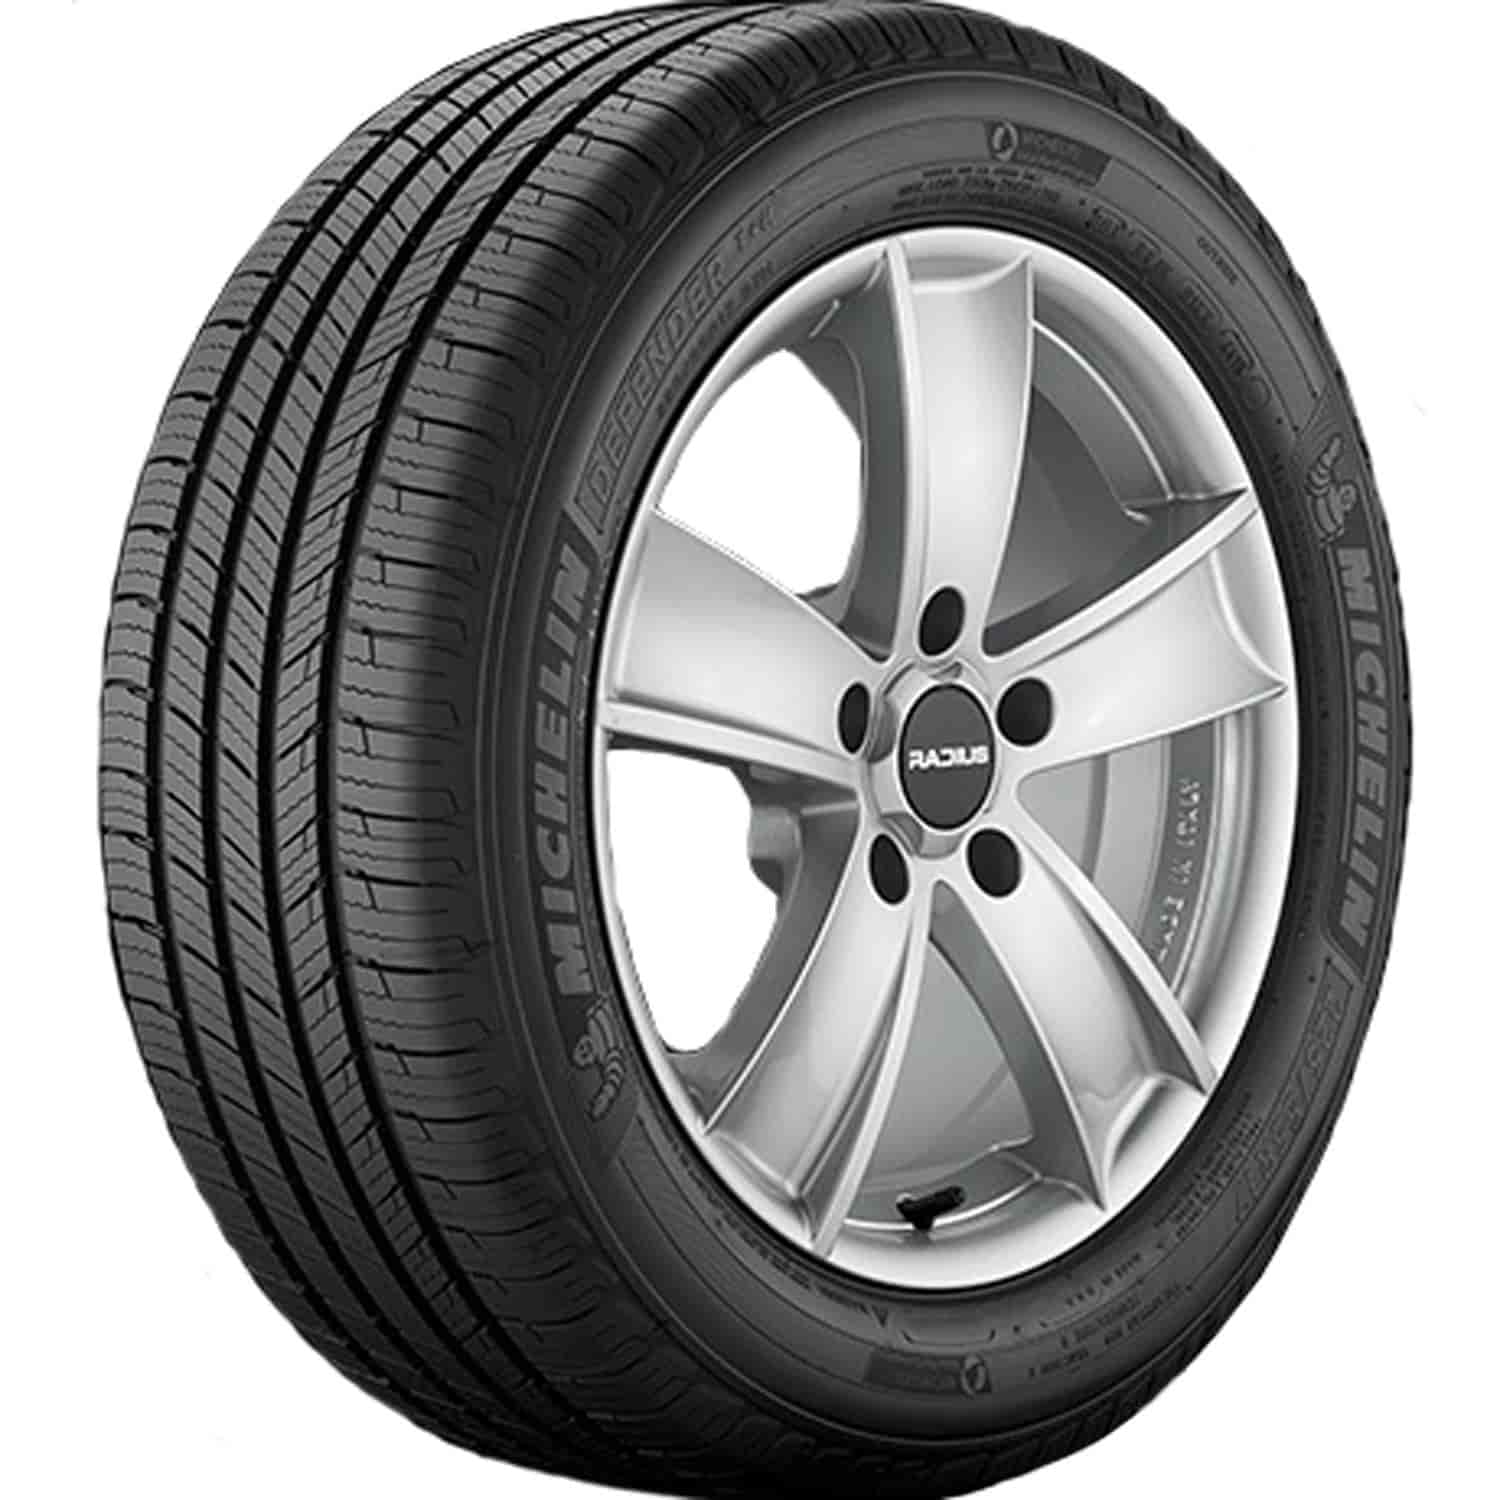 Defender T+H Tire Size:205/55R16